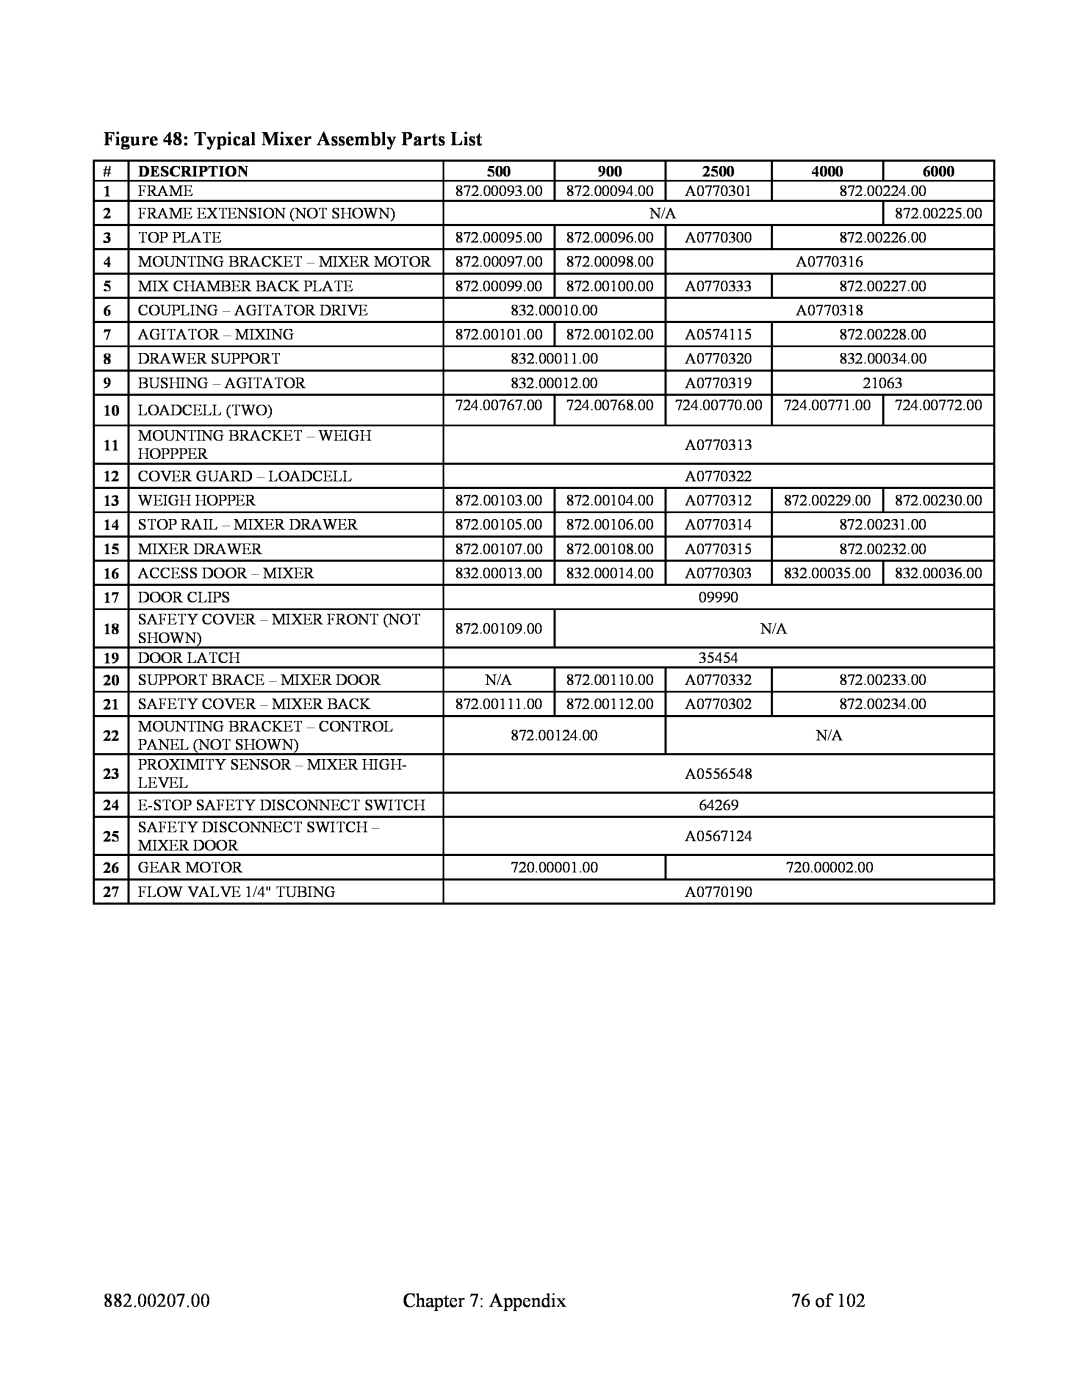 Mitsubishi Electronics 882.00207.00 specifications Typical Mixer Assembly Parts List, Appendix, 76 of 